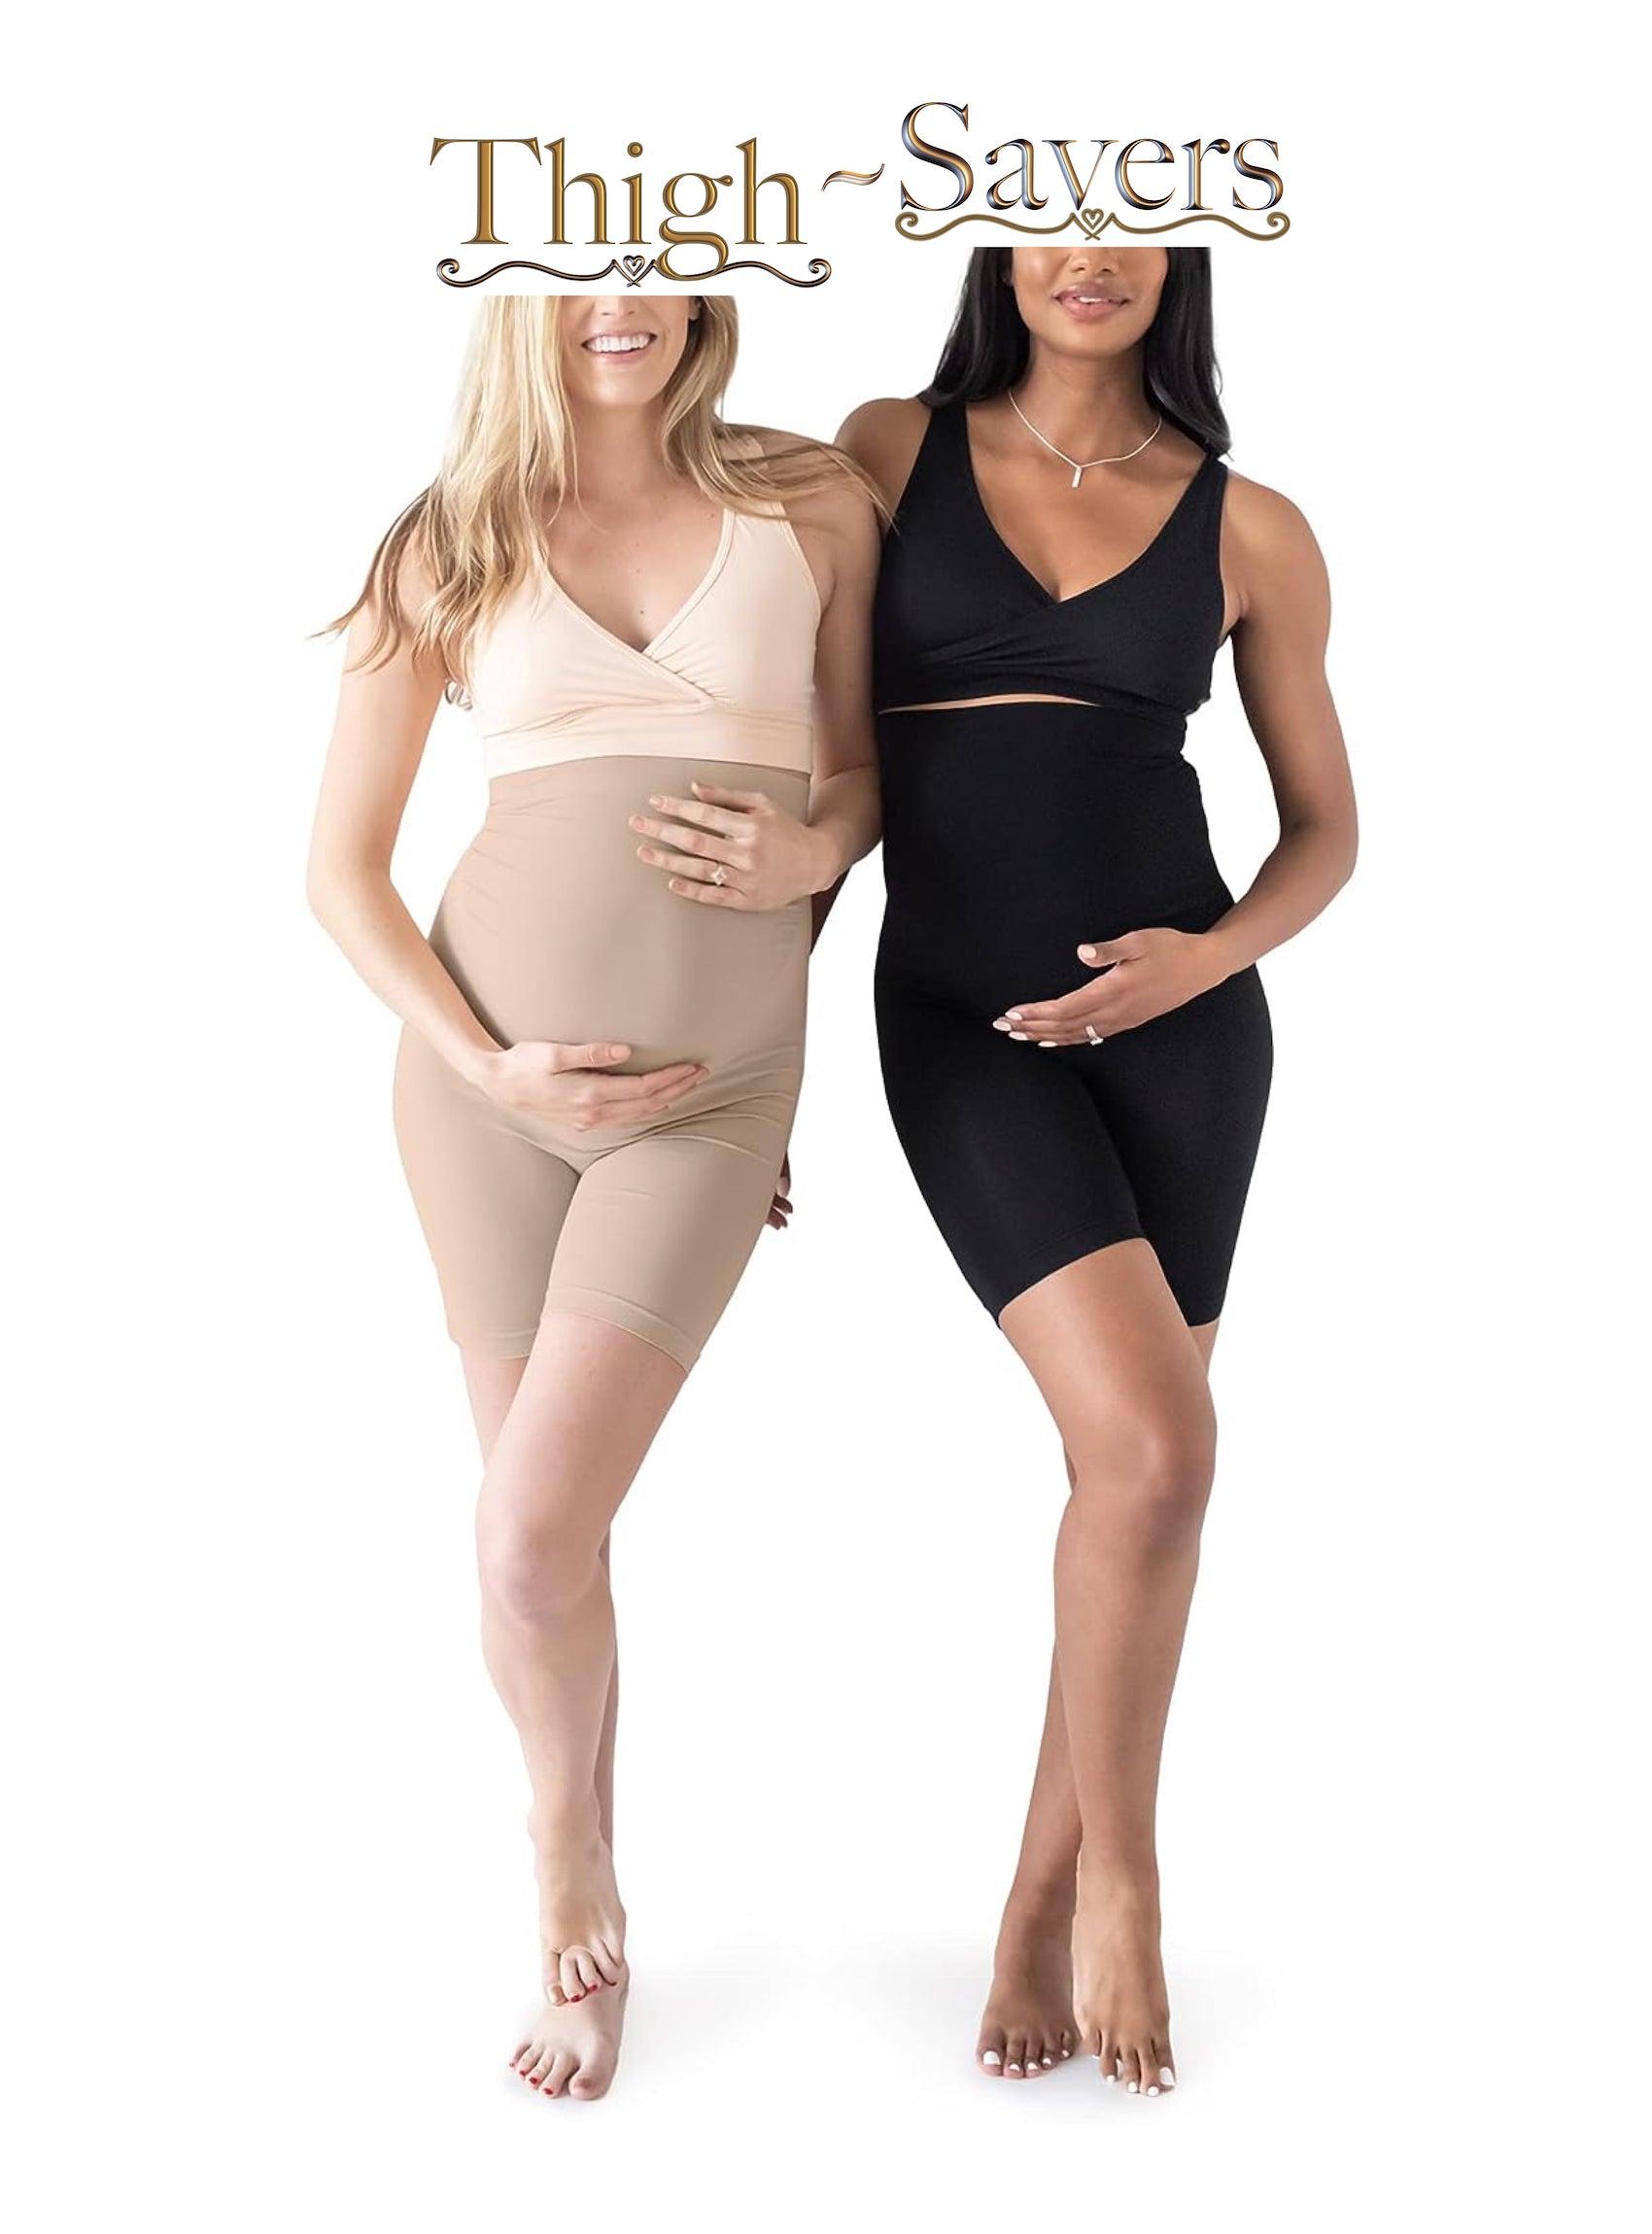 Maternity Shorts Shapewear for Pregnant Women Shorts Belly Support